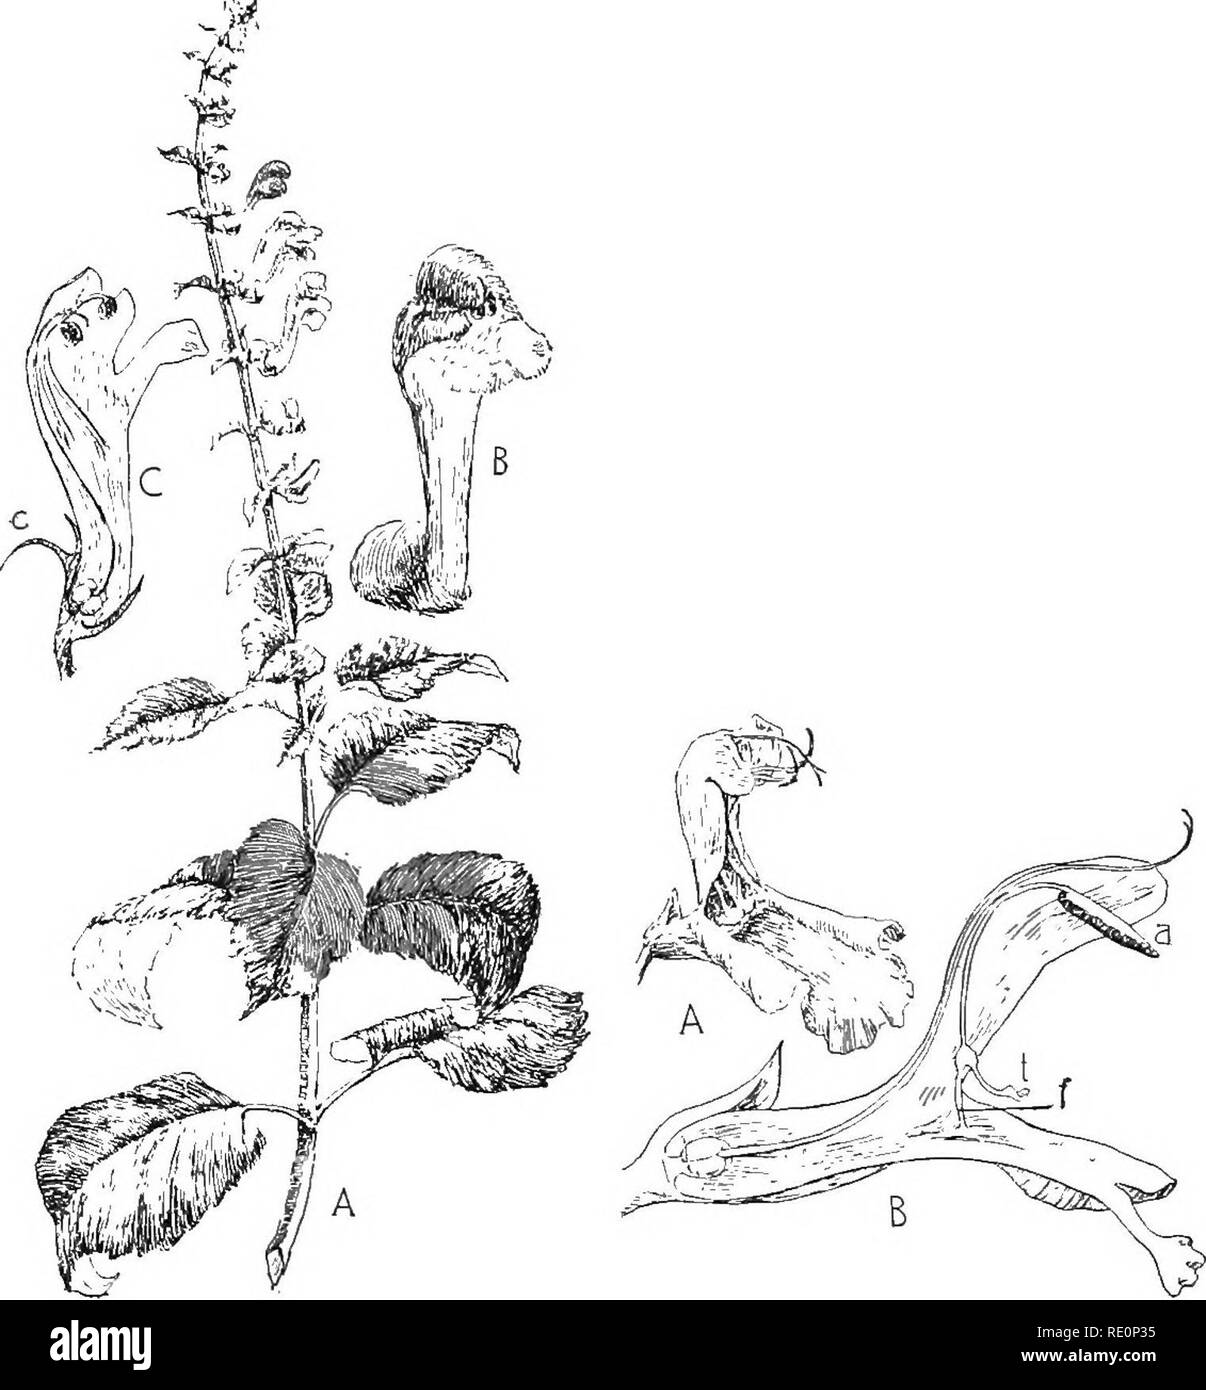 . Nature and development of plants. Botany. DEVELOPMENT OF PLANTS 477. Fig. 331. Fig. 332. Fig. 331. A common species of the Mint family: A, inflorescence of the skullcap (Scutellaria). Note the square stem, opposite leaves. Why are all the flowers facing one way? B, flower enlarged, showing the two-lobed under lip and the three-lobed upper lip which conceals the sporophylls. C, section of the flower. Ovary four-Iobed, stamens cohering with the corolla and anthers concealed with the stigma beneath upper lip. Purpose of the crest, c, on the calyx? Fig. 332. Flower of the sage (Salvia): A, flowe Stock Photo